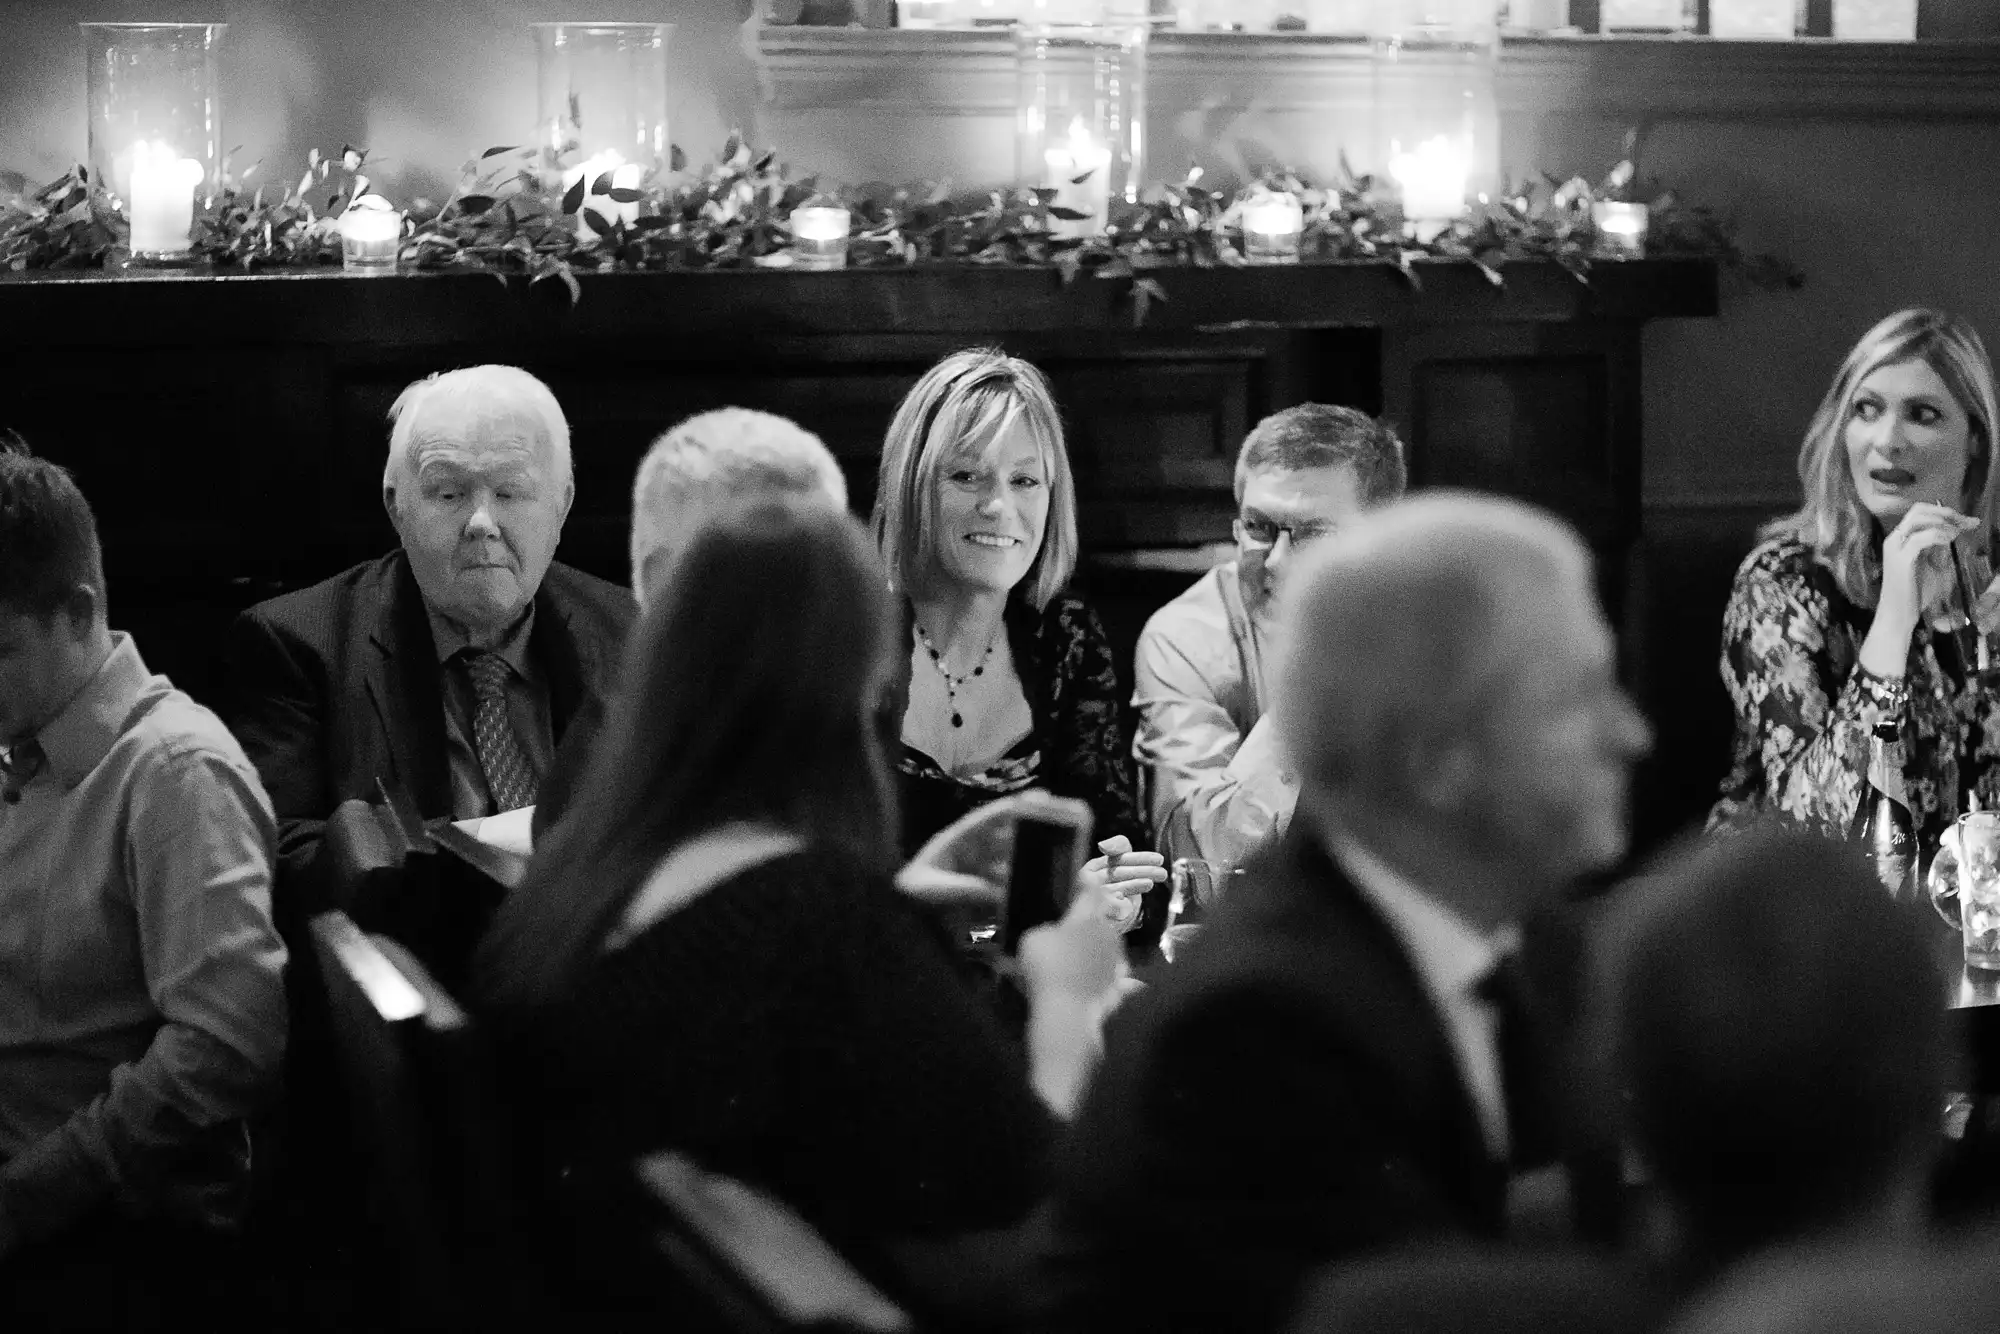 Black and white image of people at a crowded event, seated around tables, engaged in conversation with a background of dimly lit candles.